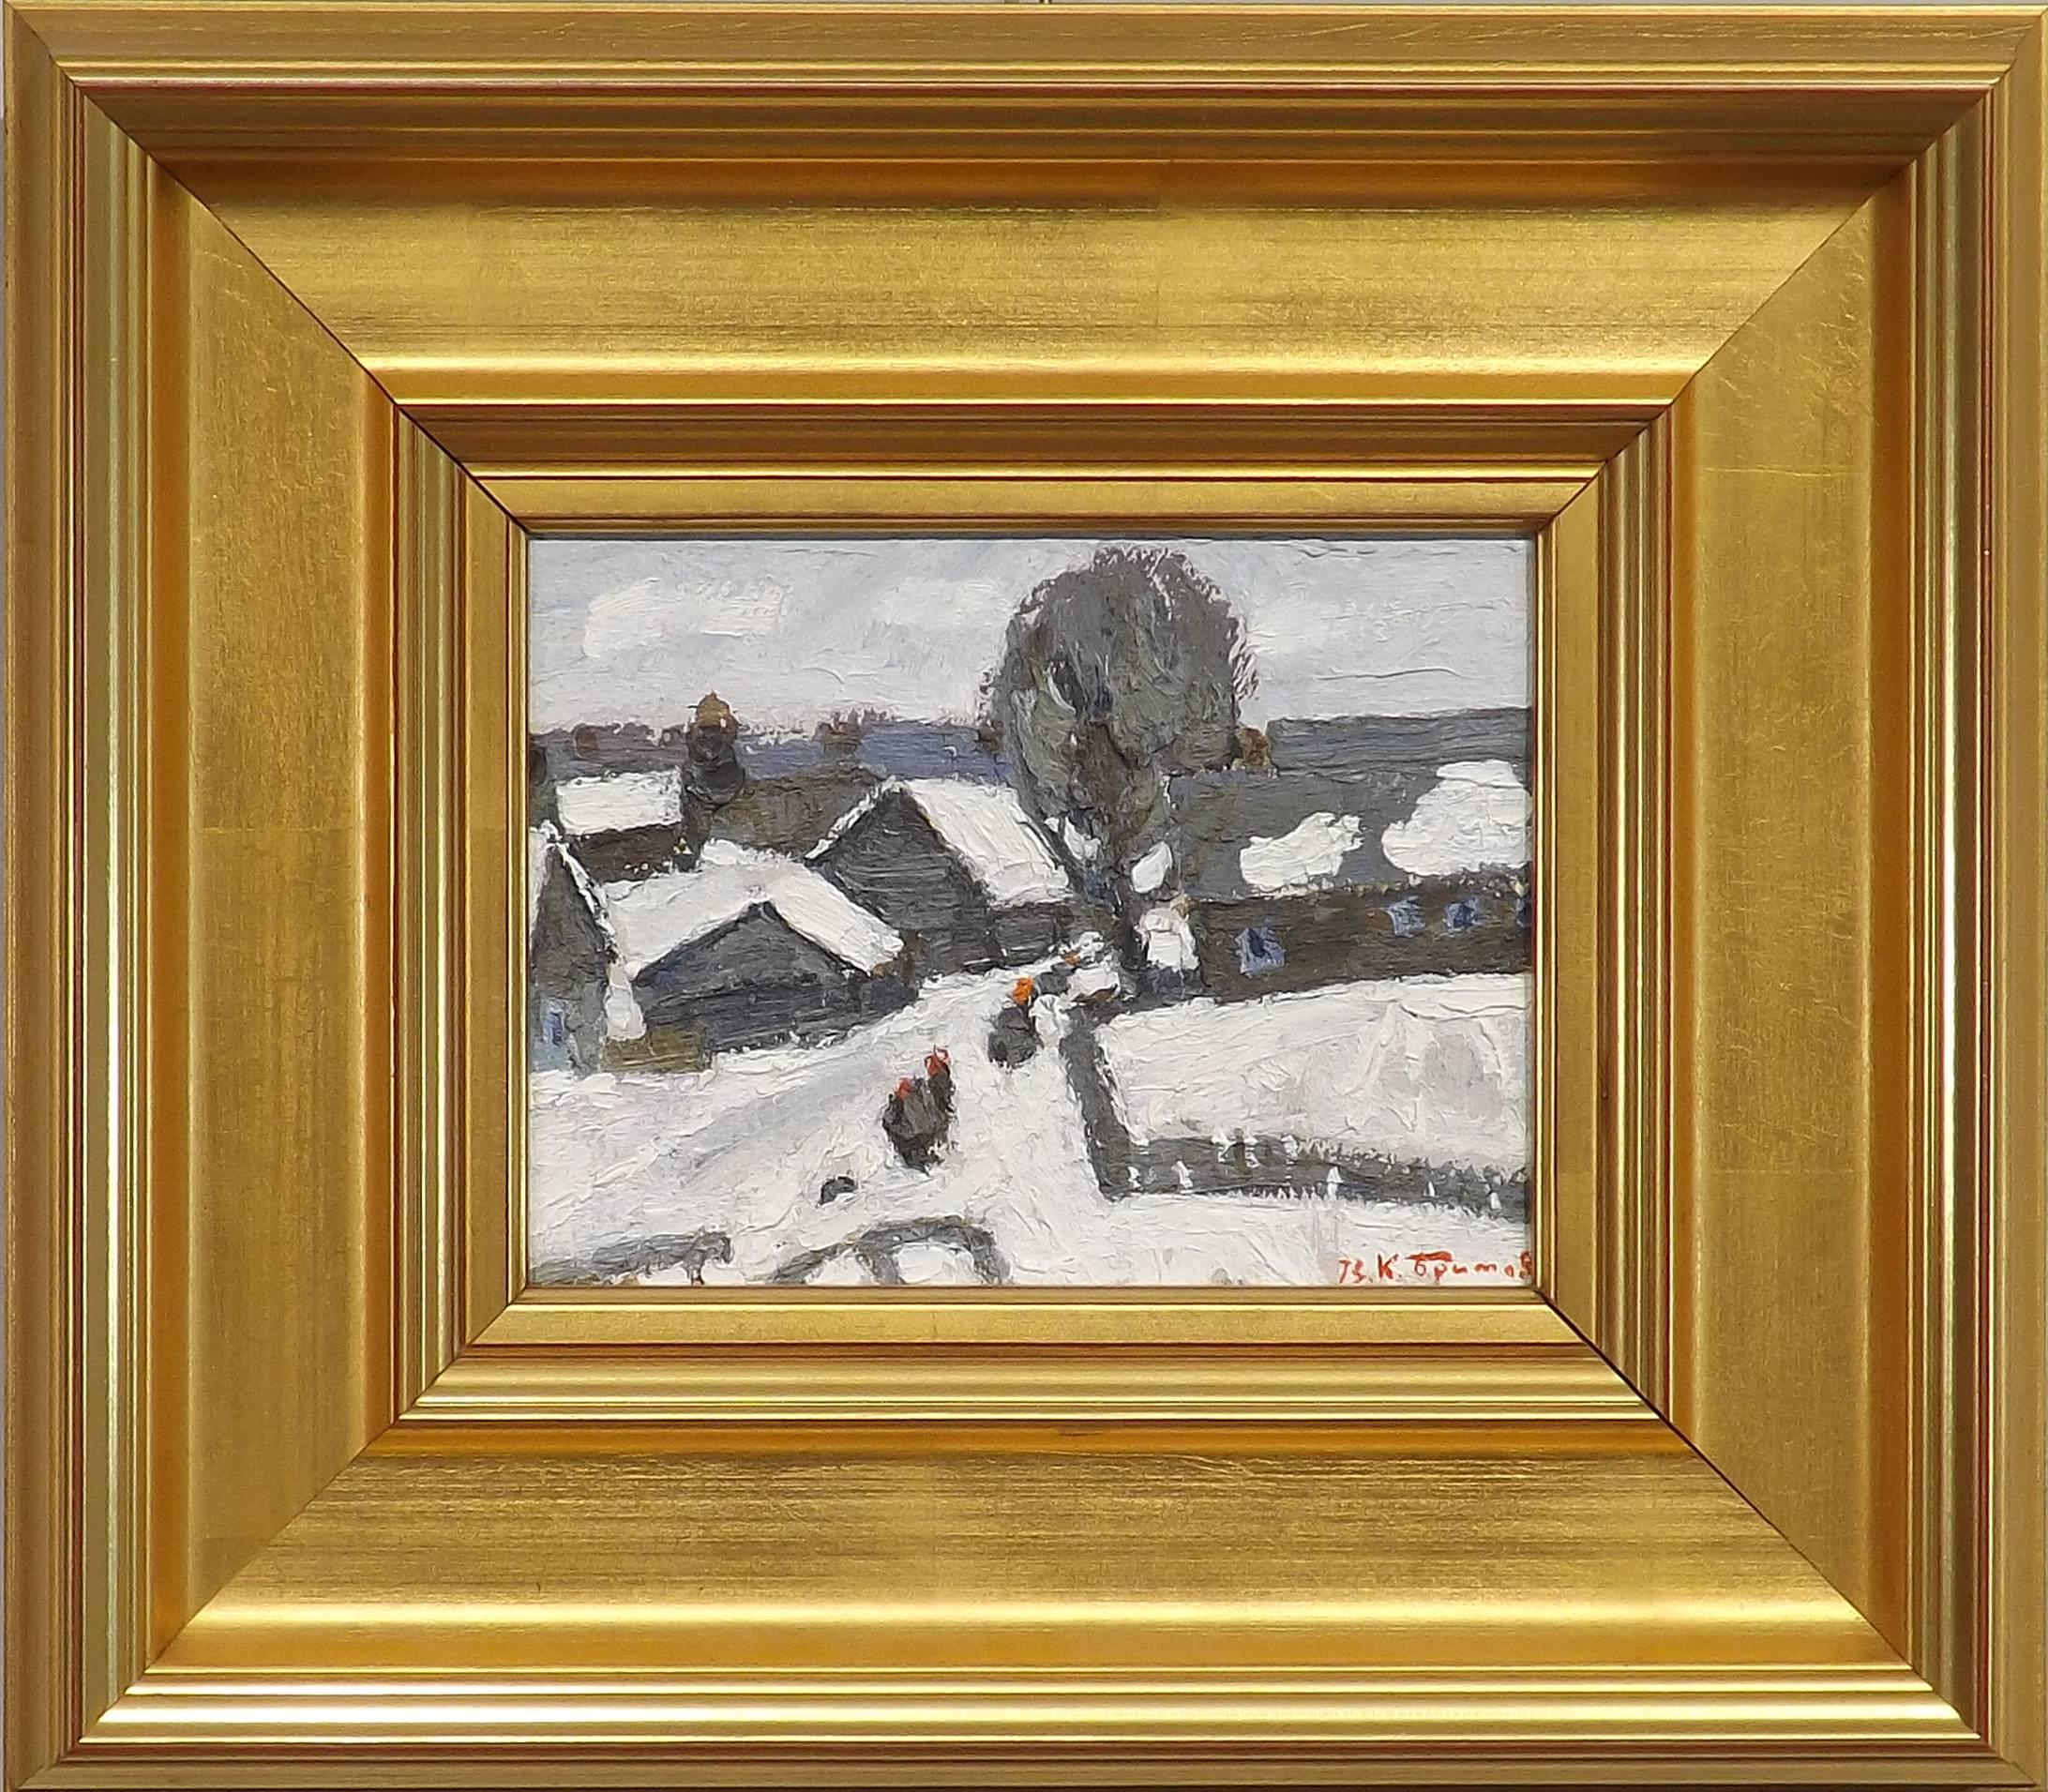 A wintry scene of figures walking through the small village of Zhelnikha, Russia, oil painting on board by Vladimir School artist Kim Britov.

Britov was born in 1925 in Sobinka in Vladimir region, and in 1945 at the age of twenty he entered the